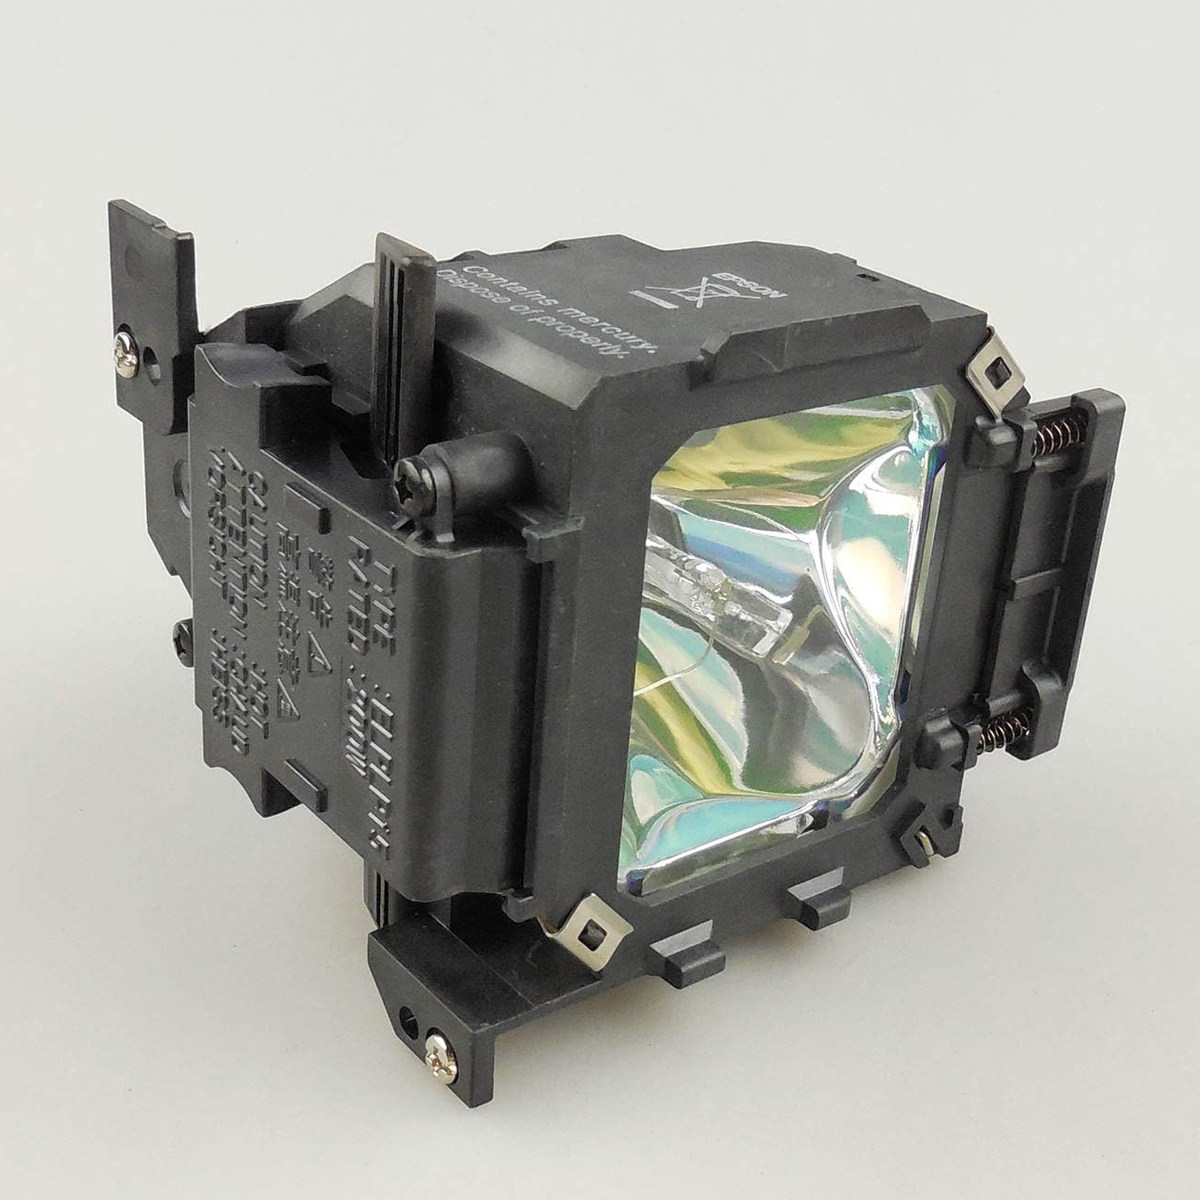 Replacement Projector lamp PJL-5015 For YAMAHA LPX 500